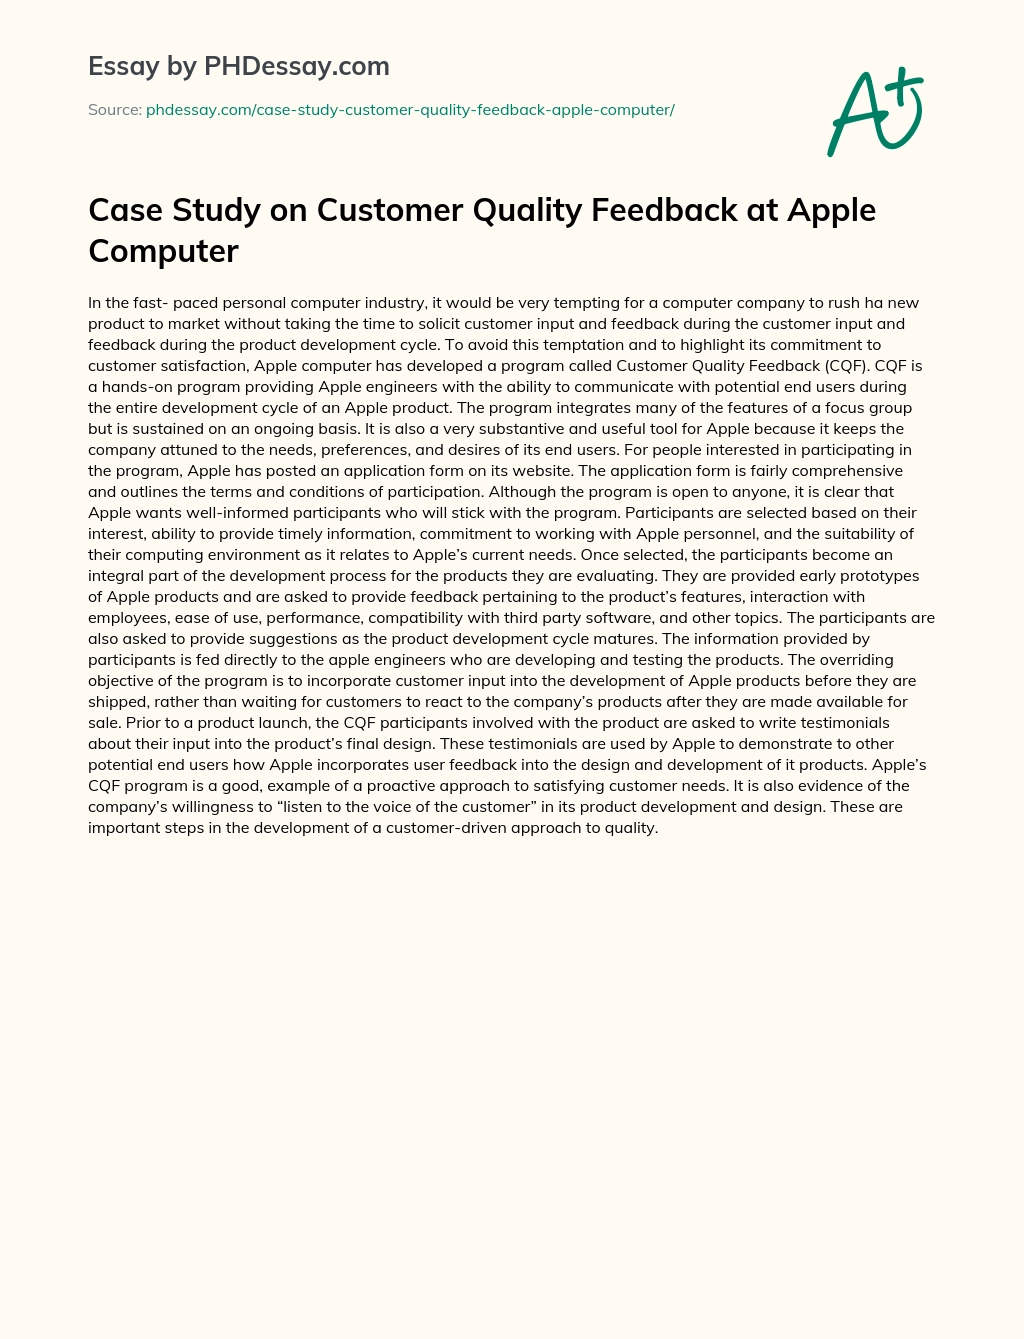 Case Study on Customer Quality Feedback at Apple Computer essay